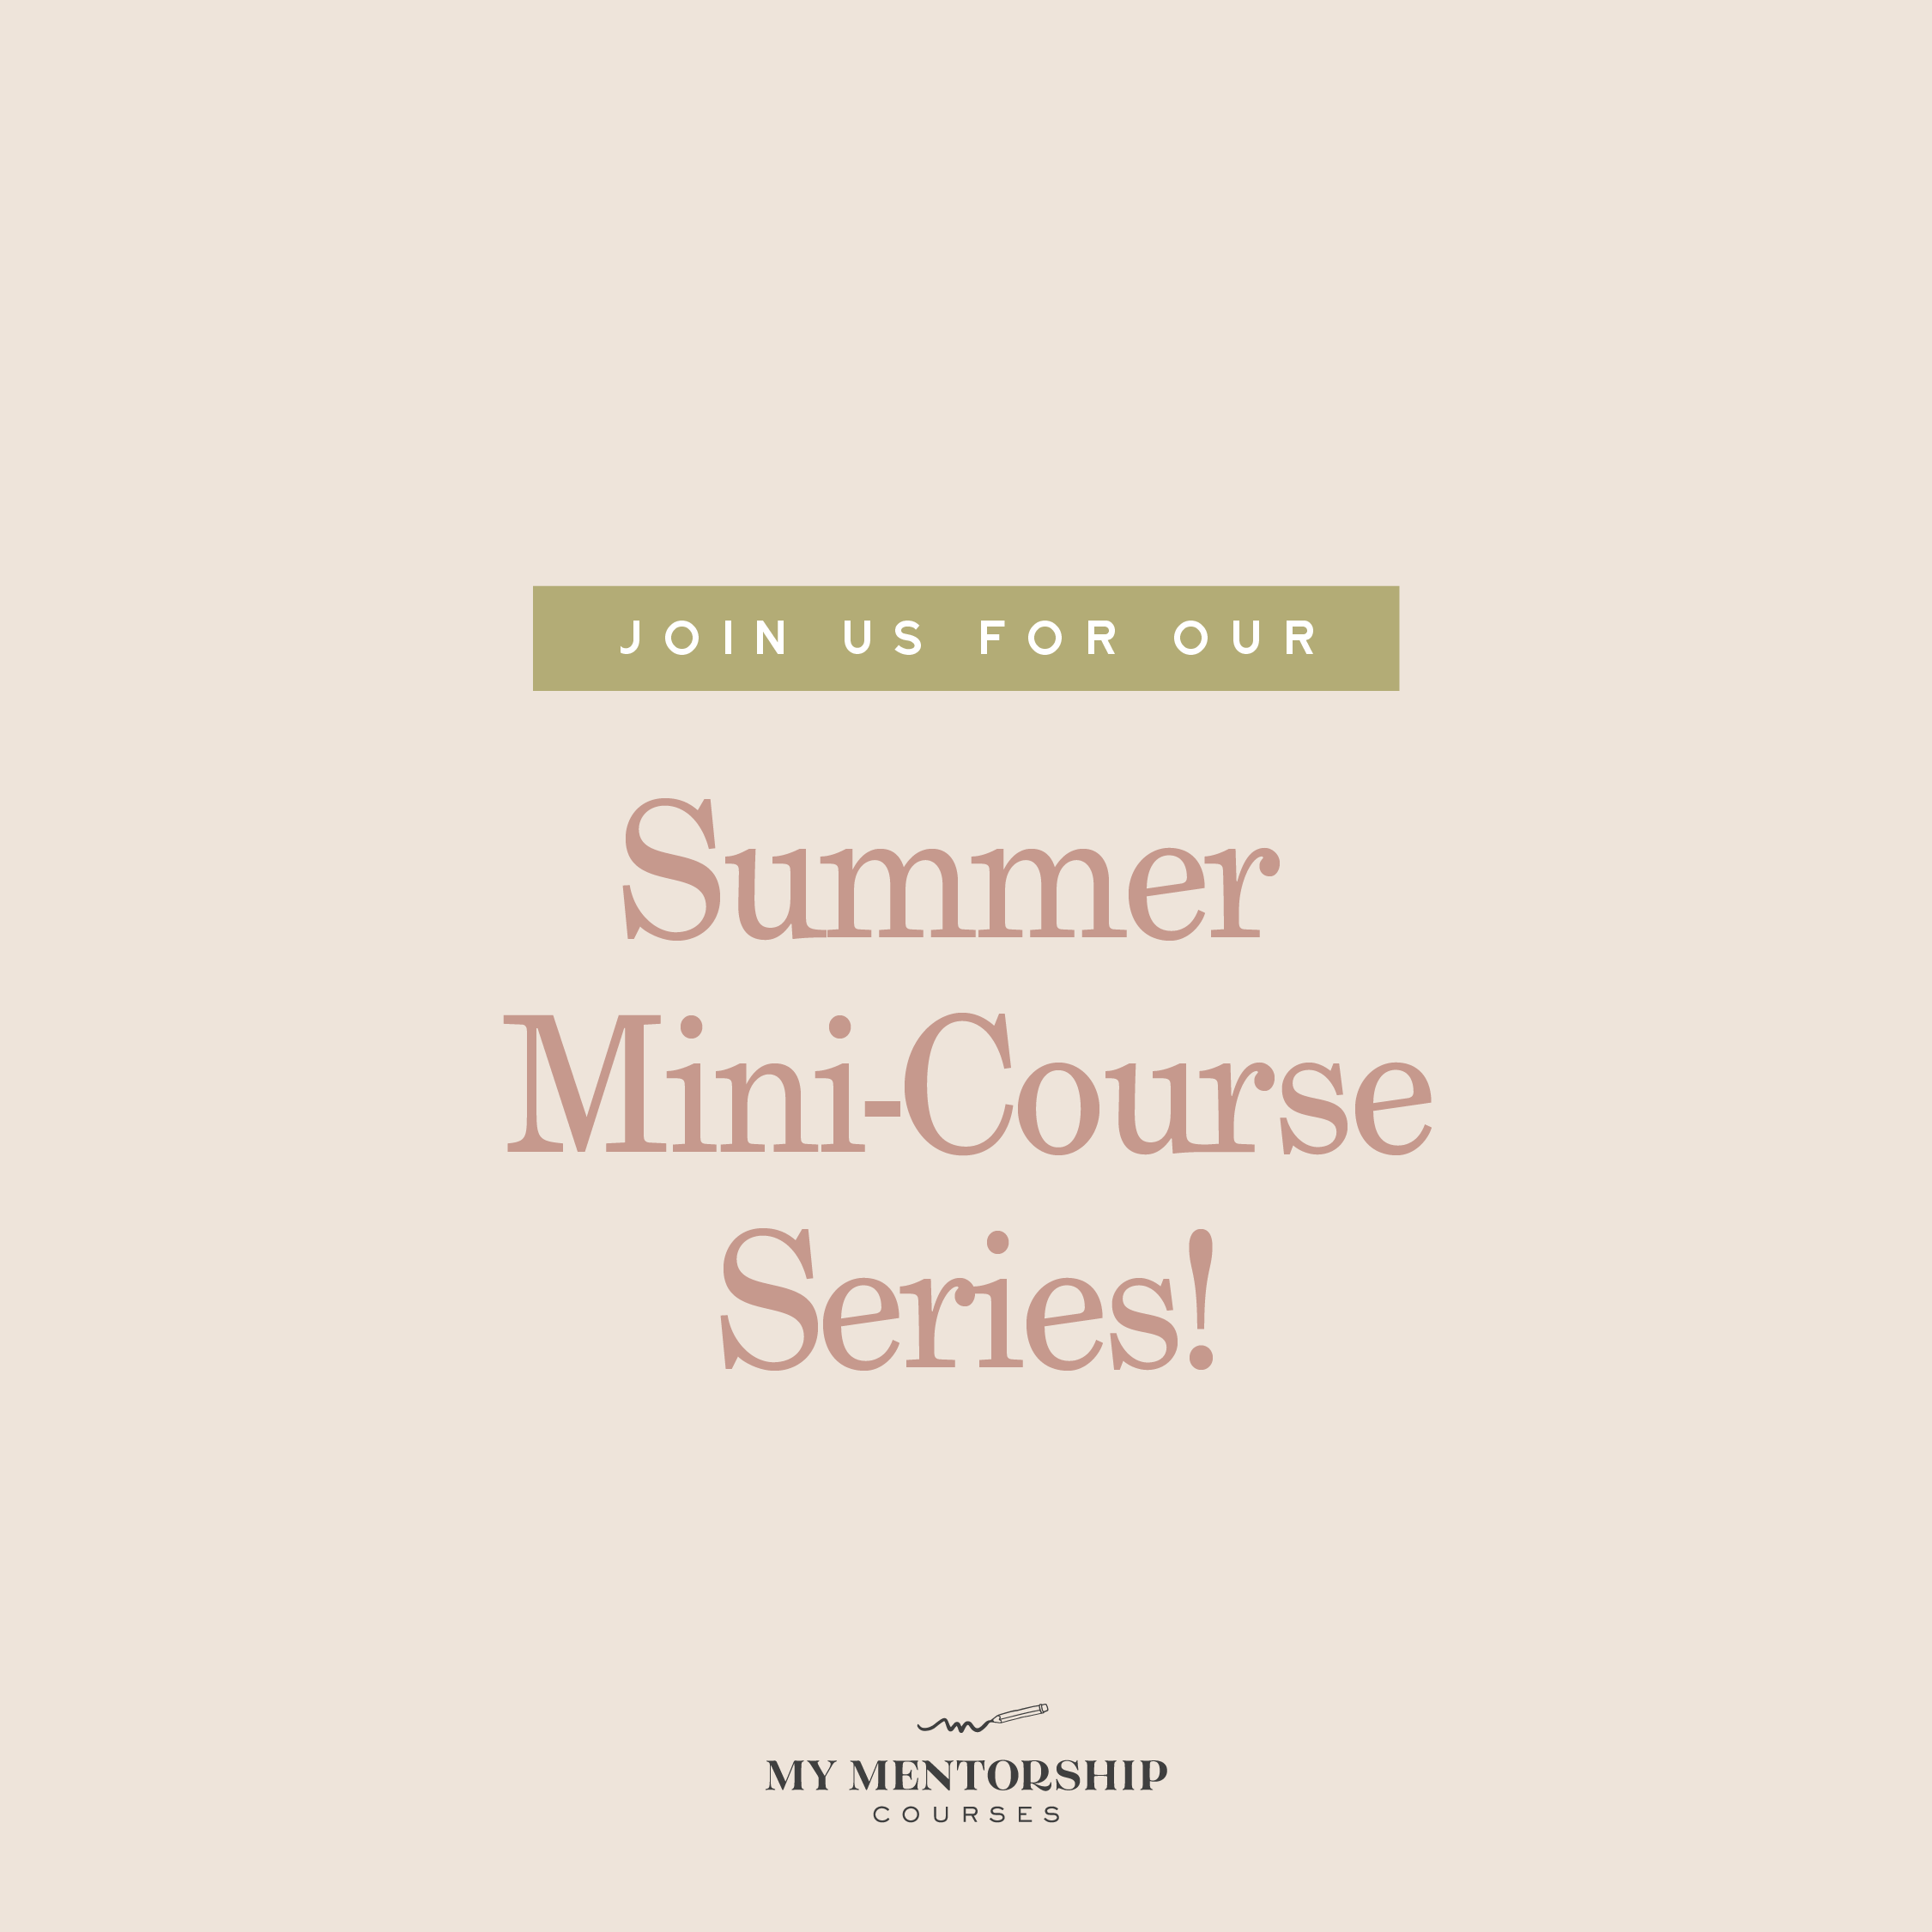 The My Mentorship Courses Mini-Courses Are Live on Monday, June 6